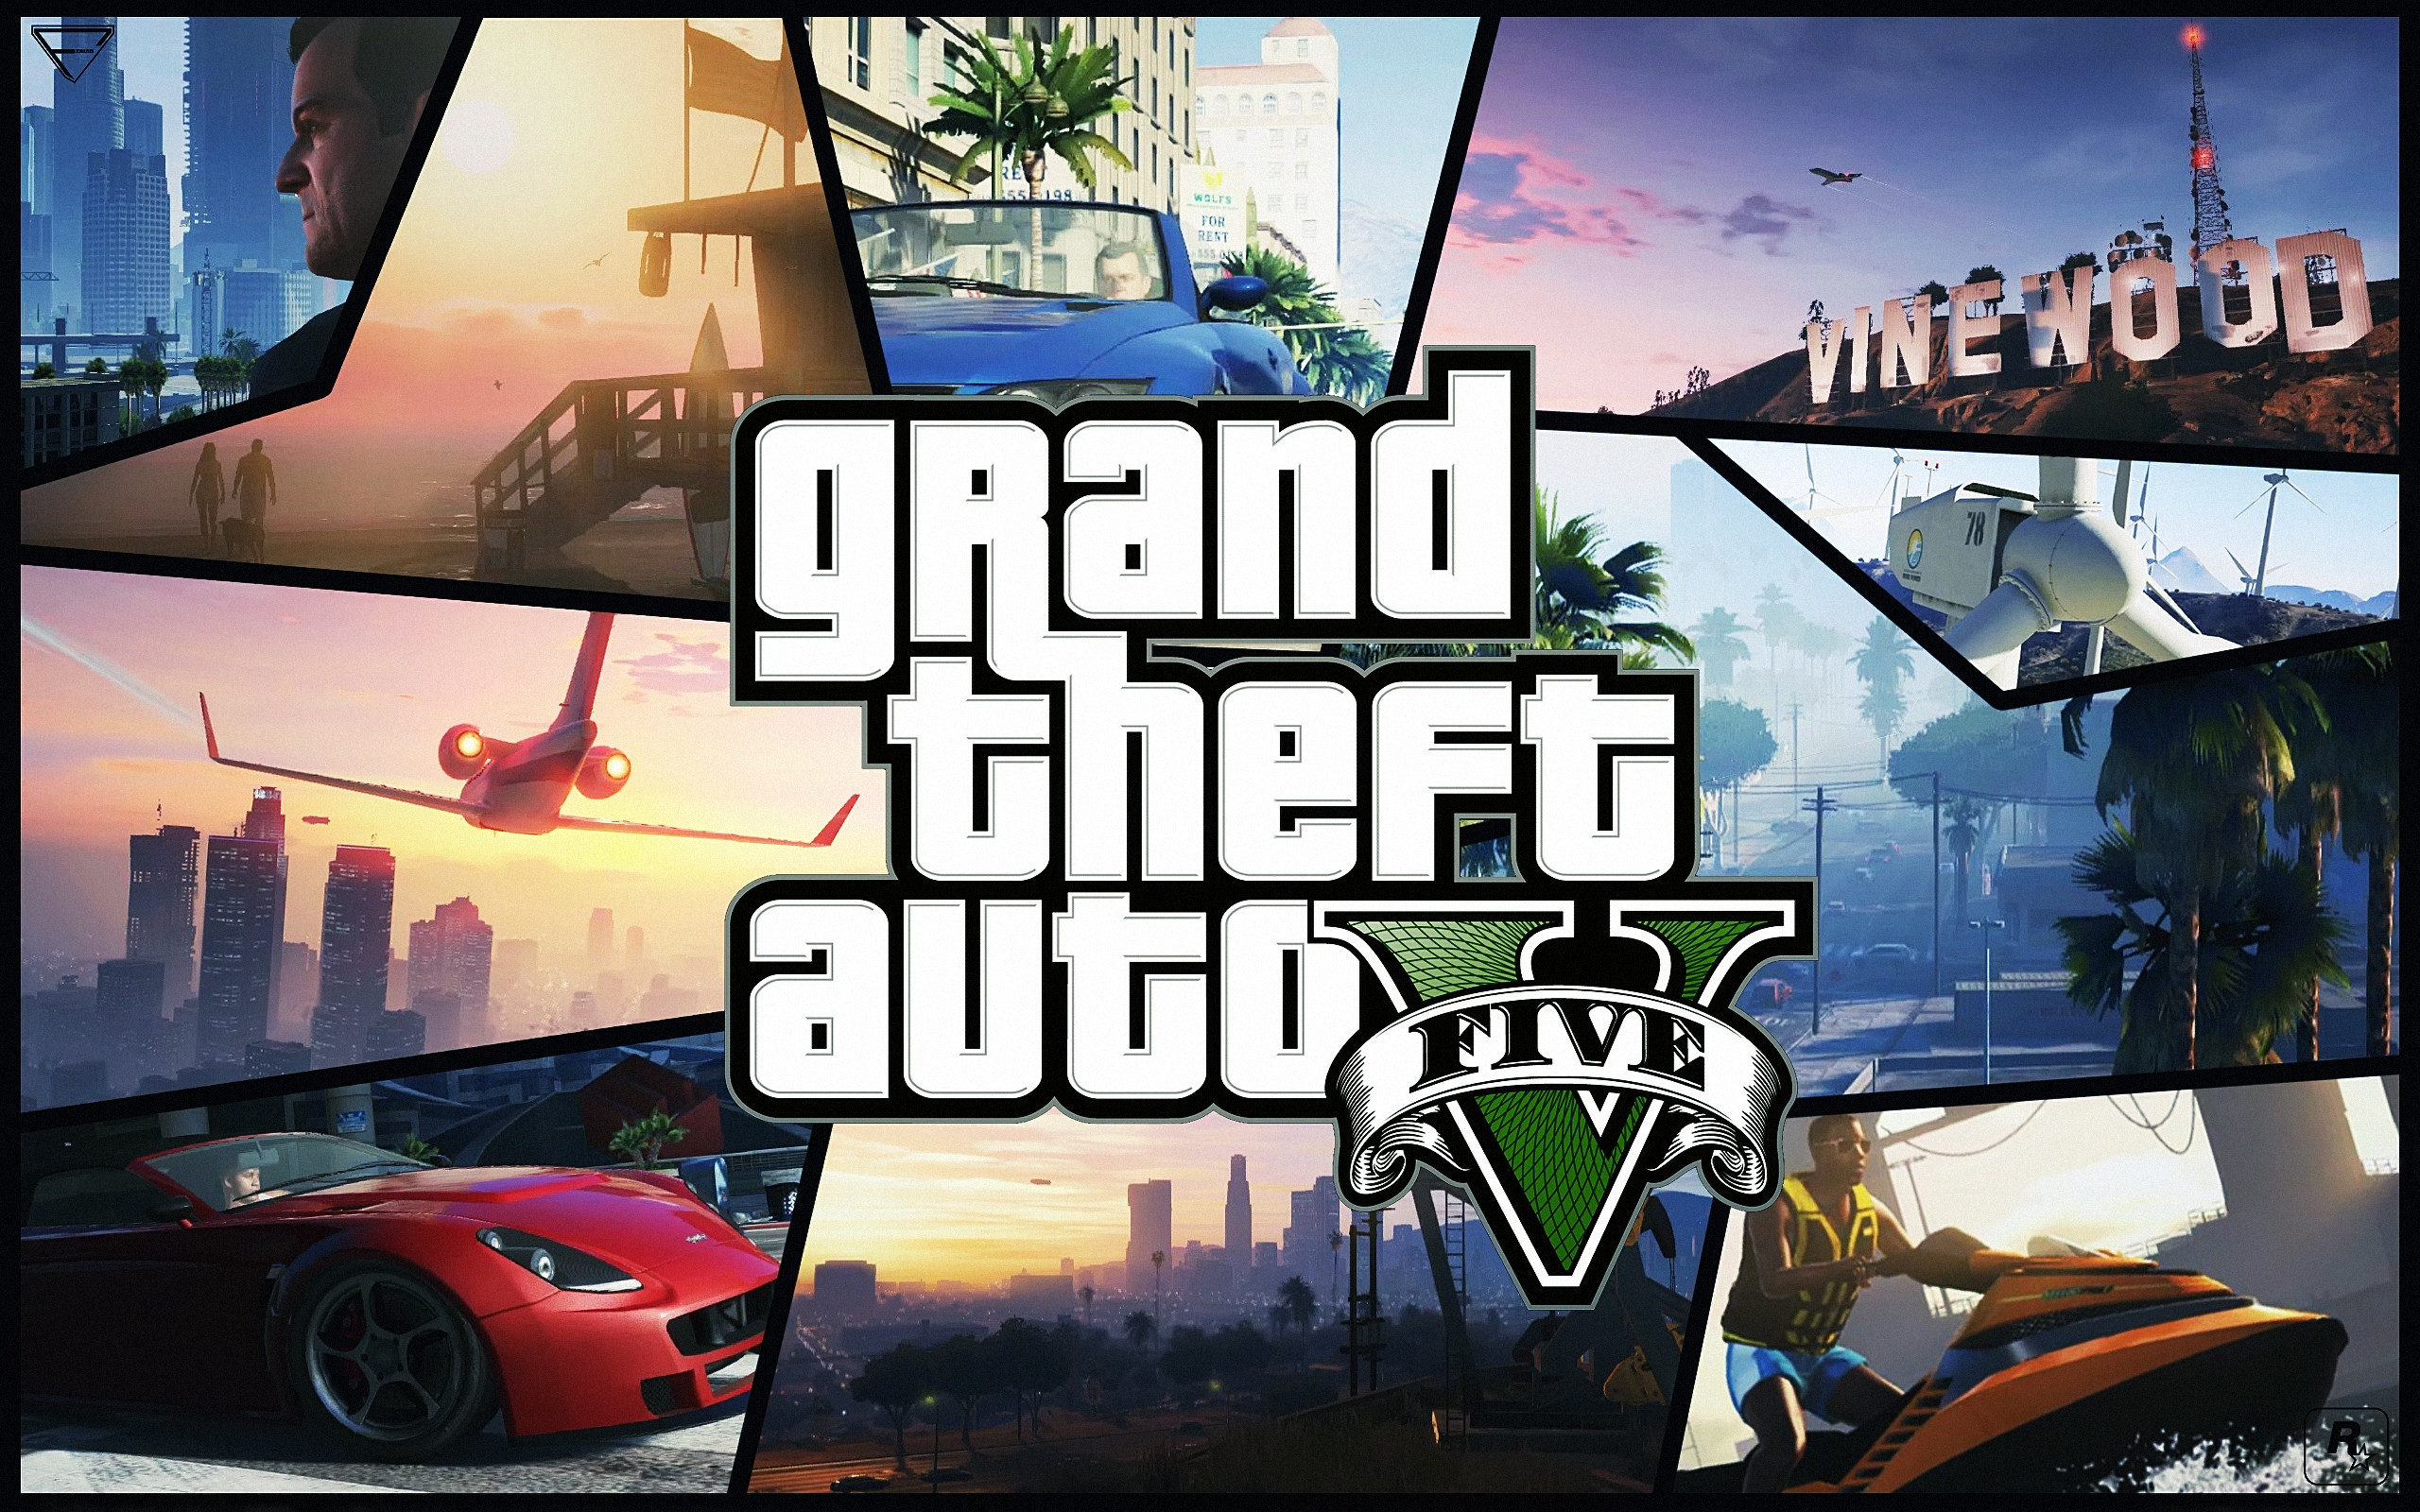 2560x1600 ... GTA 5 High Quality Wallpapers Gallery, OJY.3889462